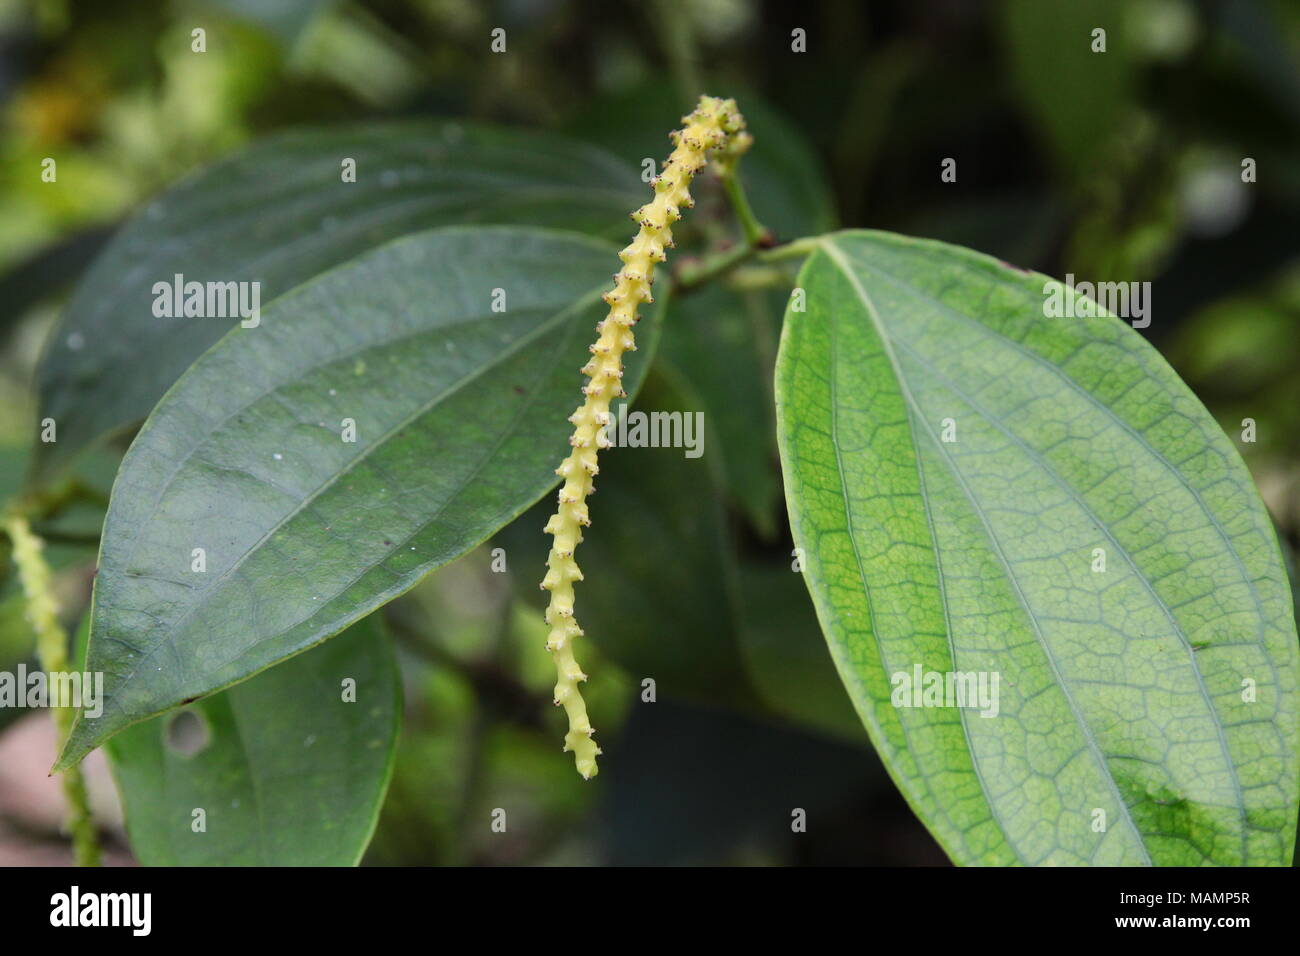 Close-up of fresh live Piper nigrum peppercorns (Black Pepper) flower on its tree. Piper nigrum is a flowering vine in the family Piperaceae. Stock Photo